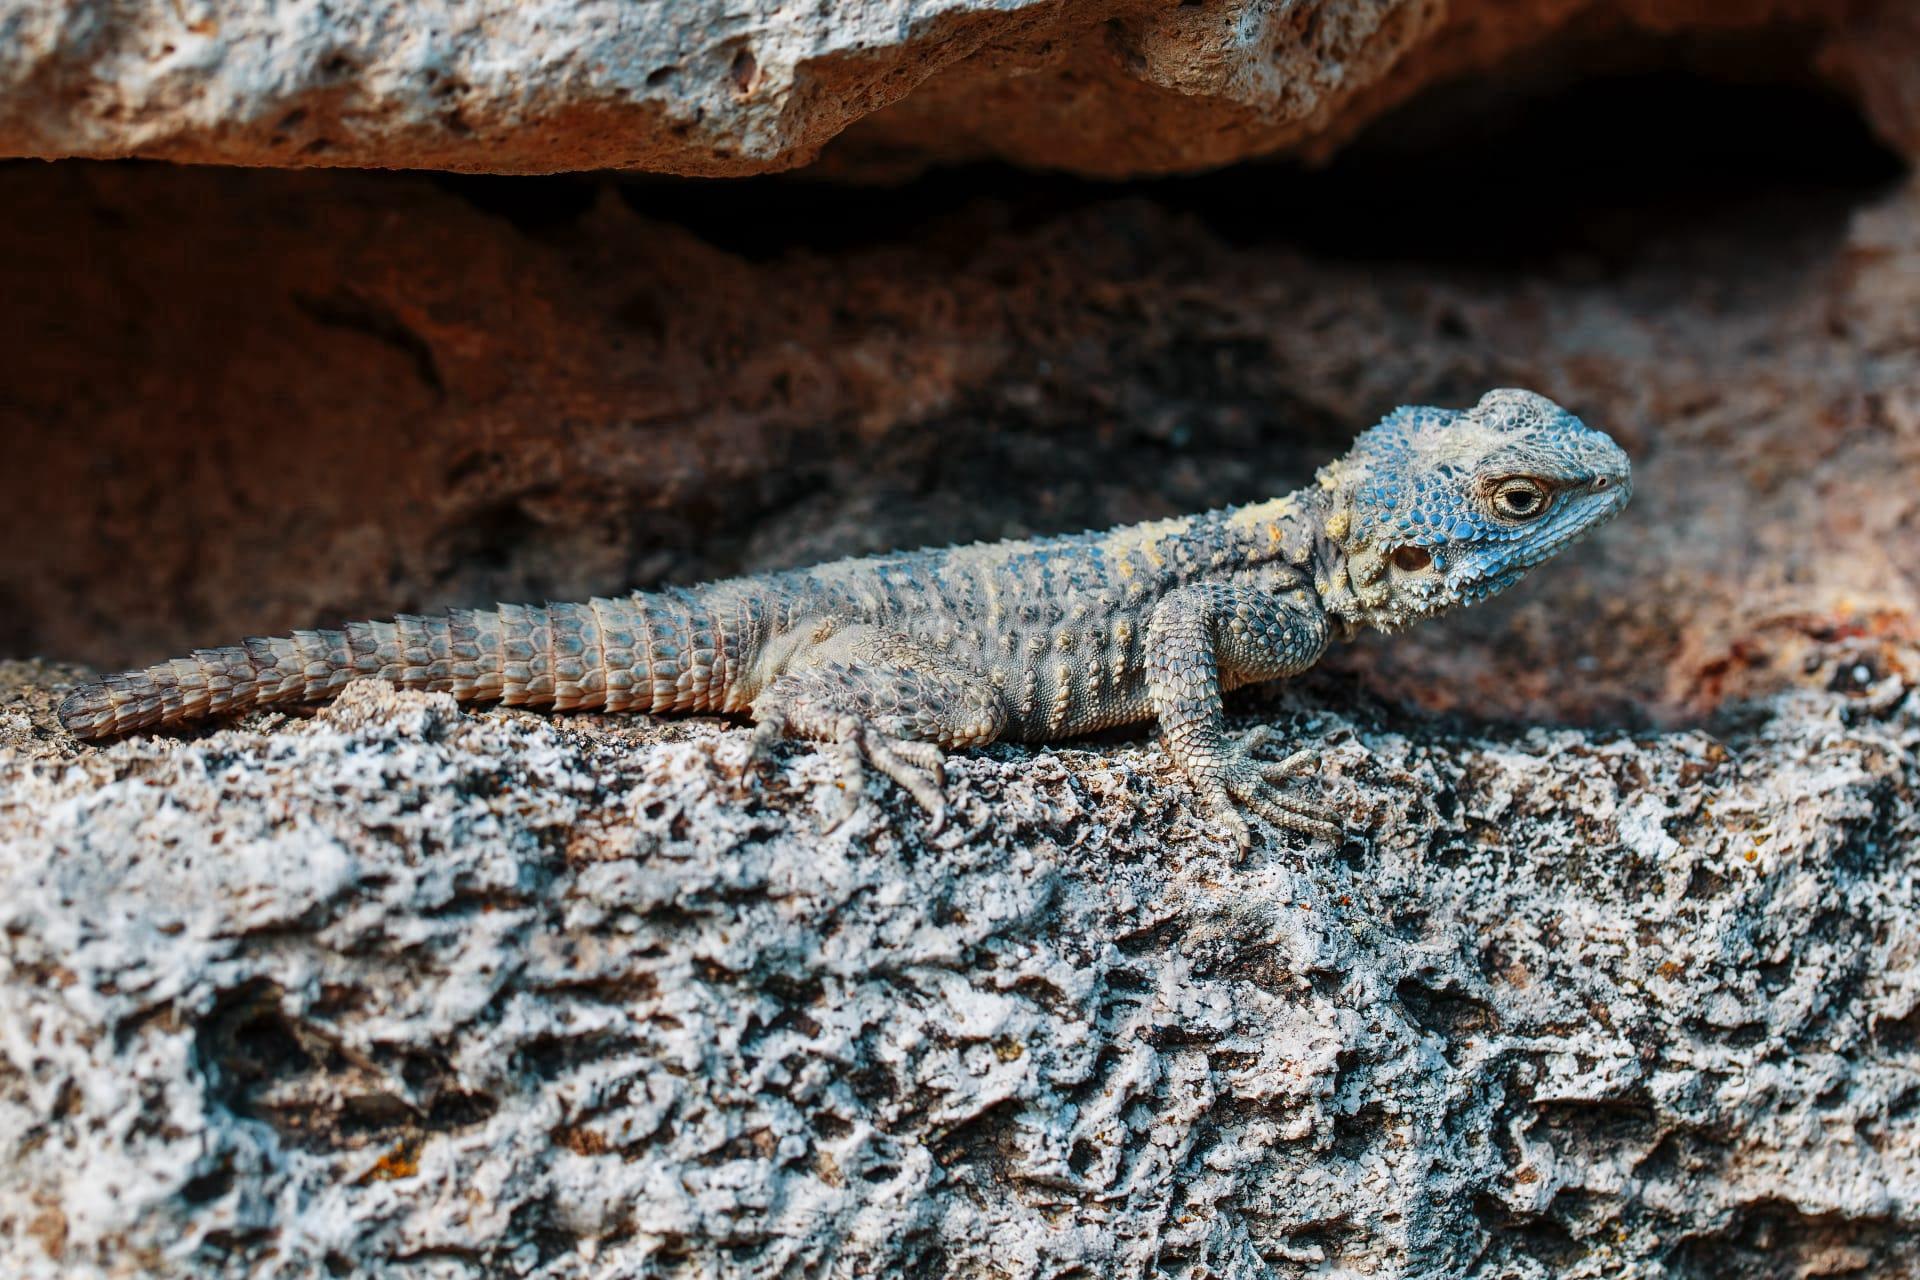 African spiny tailed lizard pictures